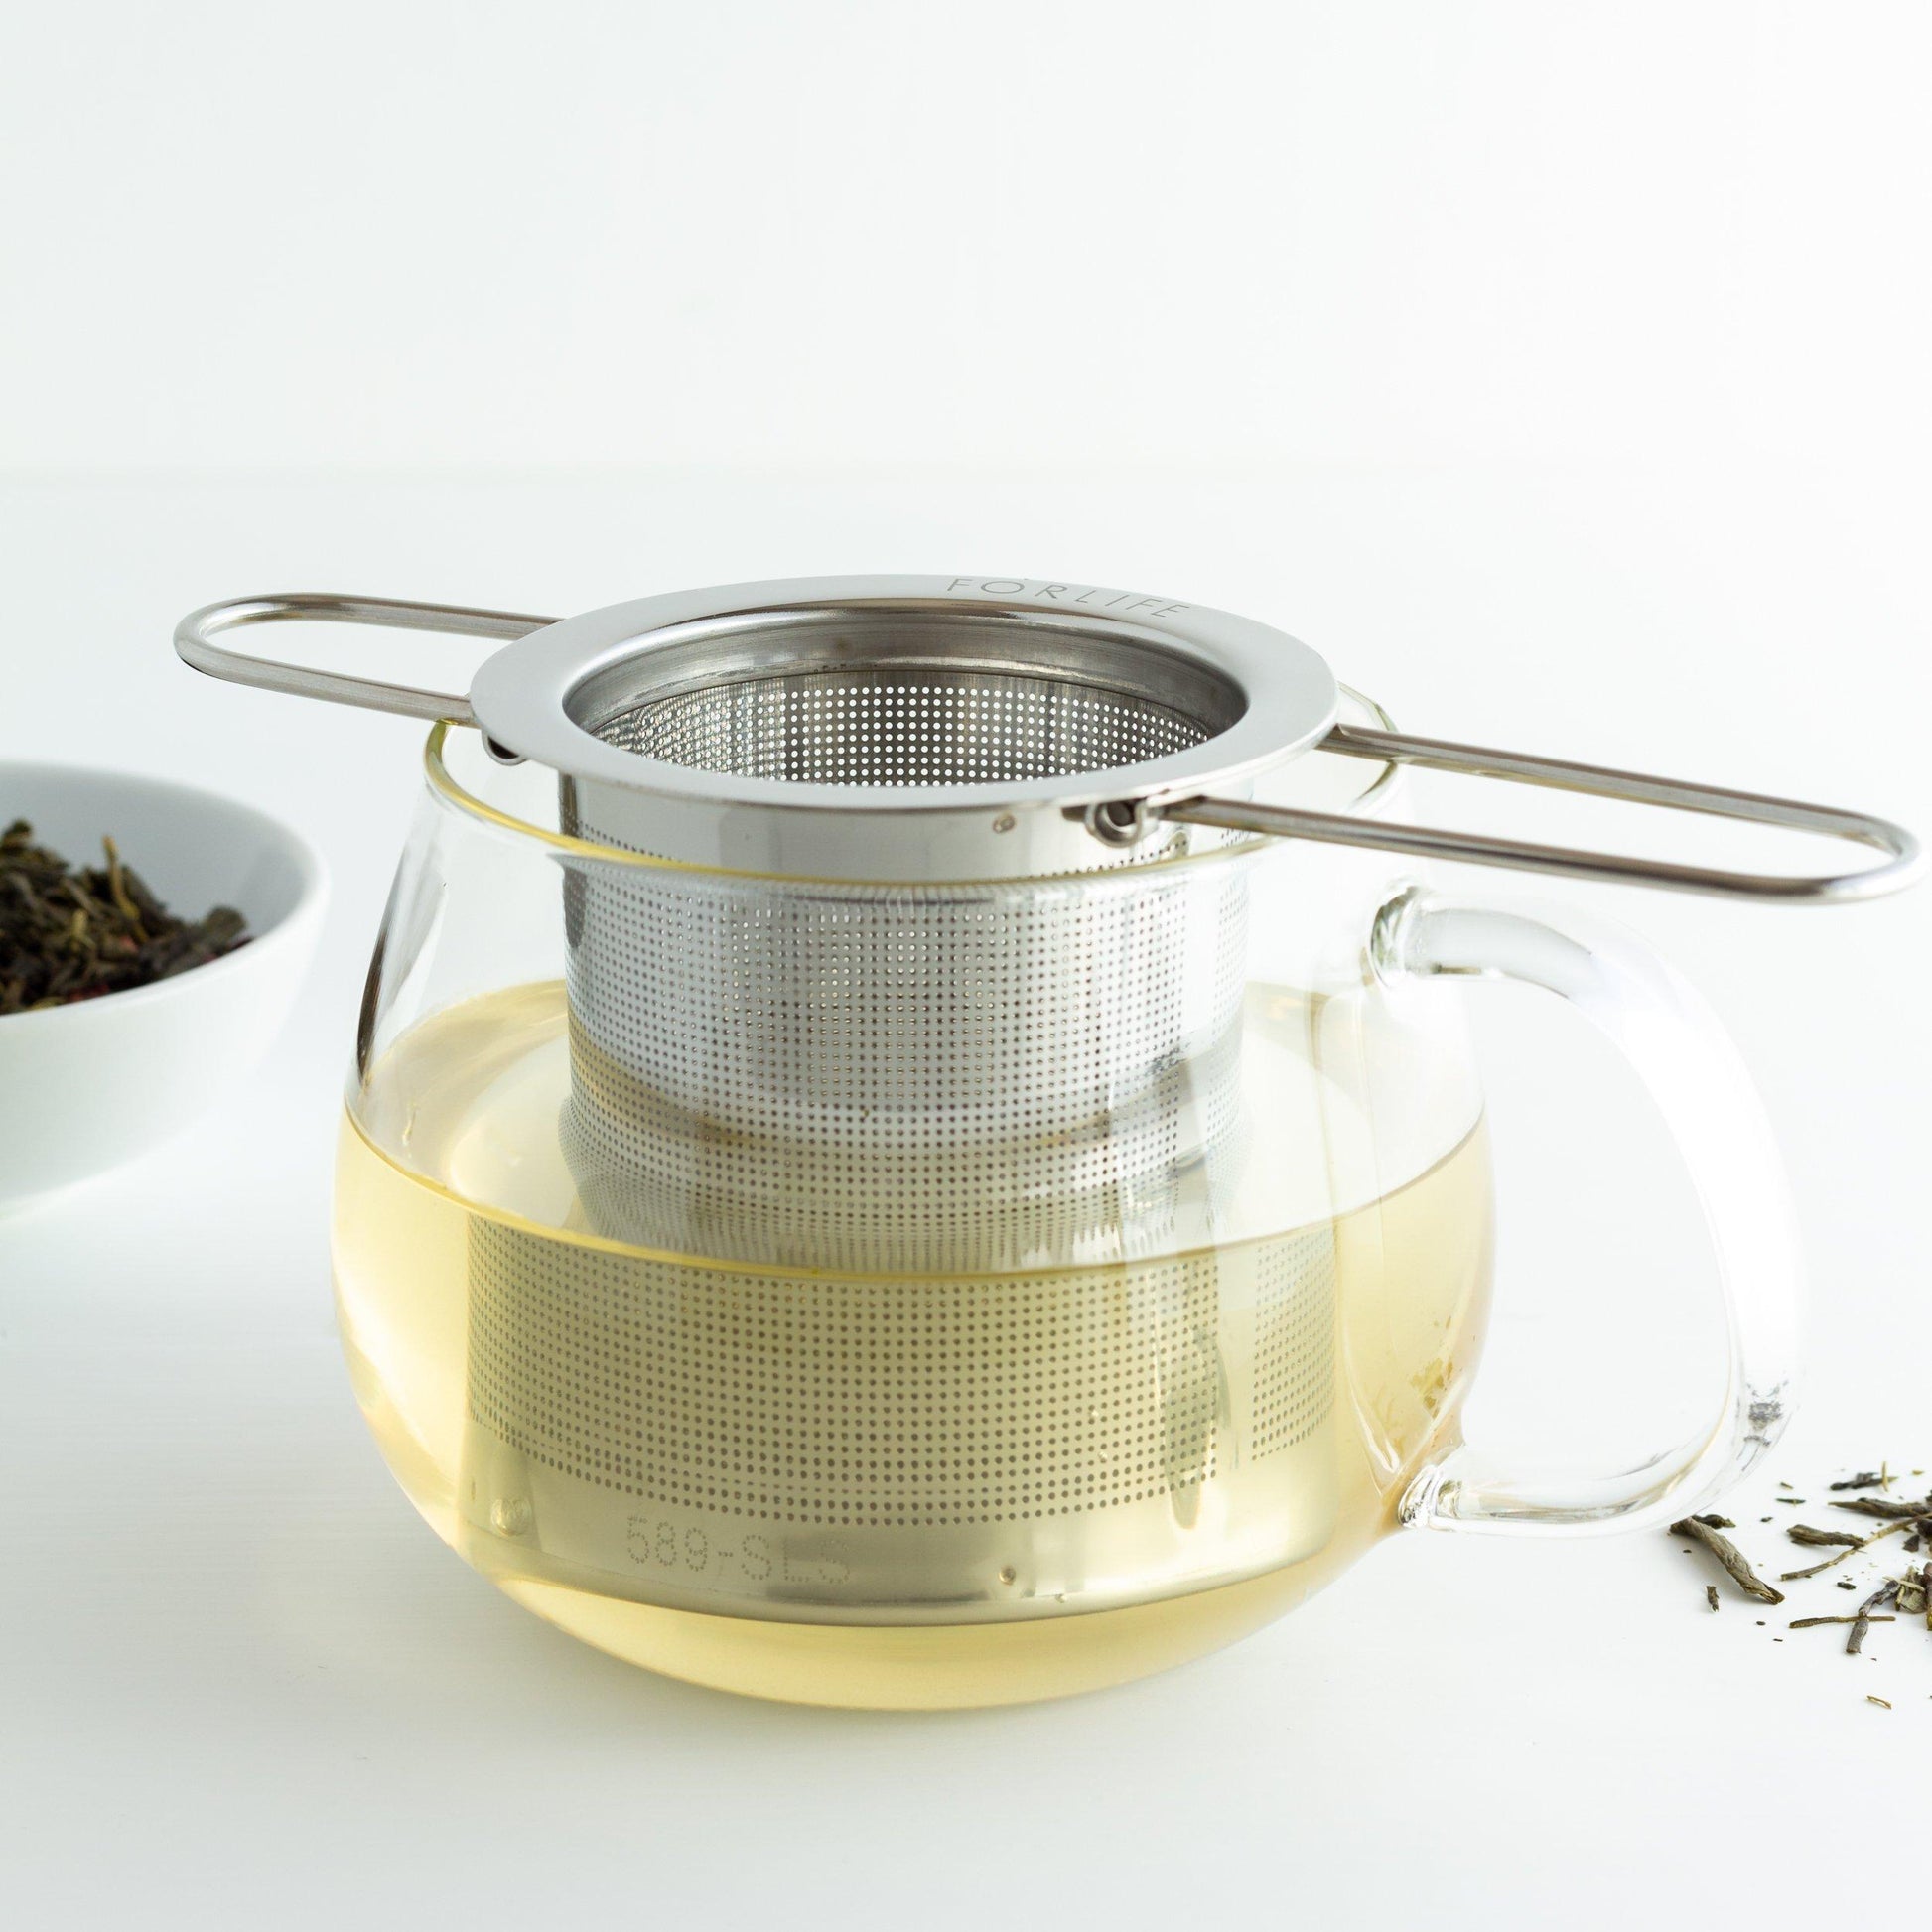 Tea Infuser Basket with Folding Handles (shown in a glass with steeped tea)